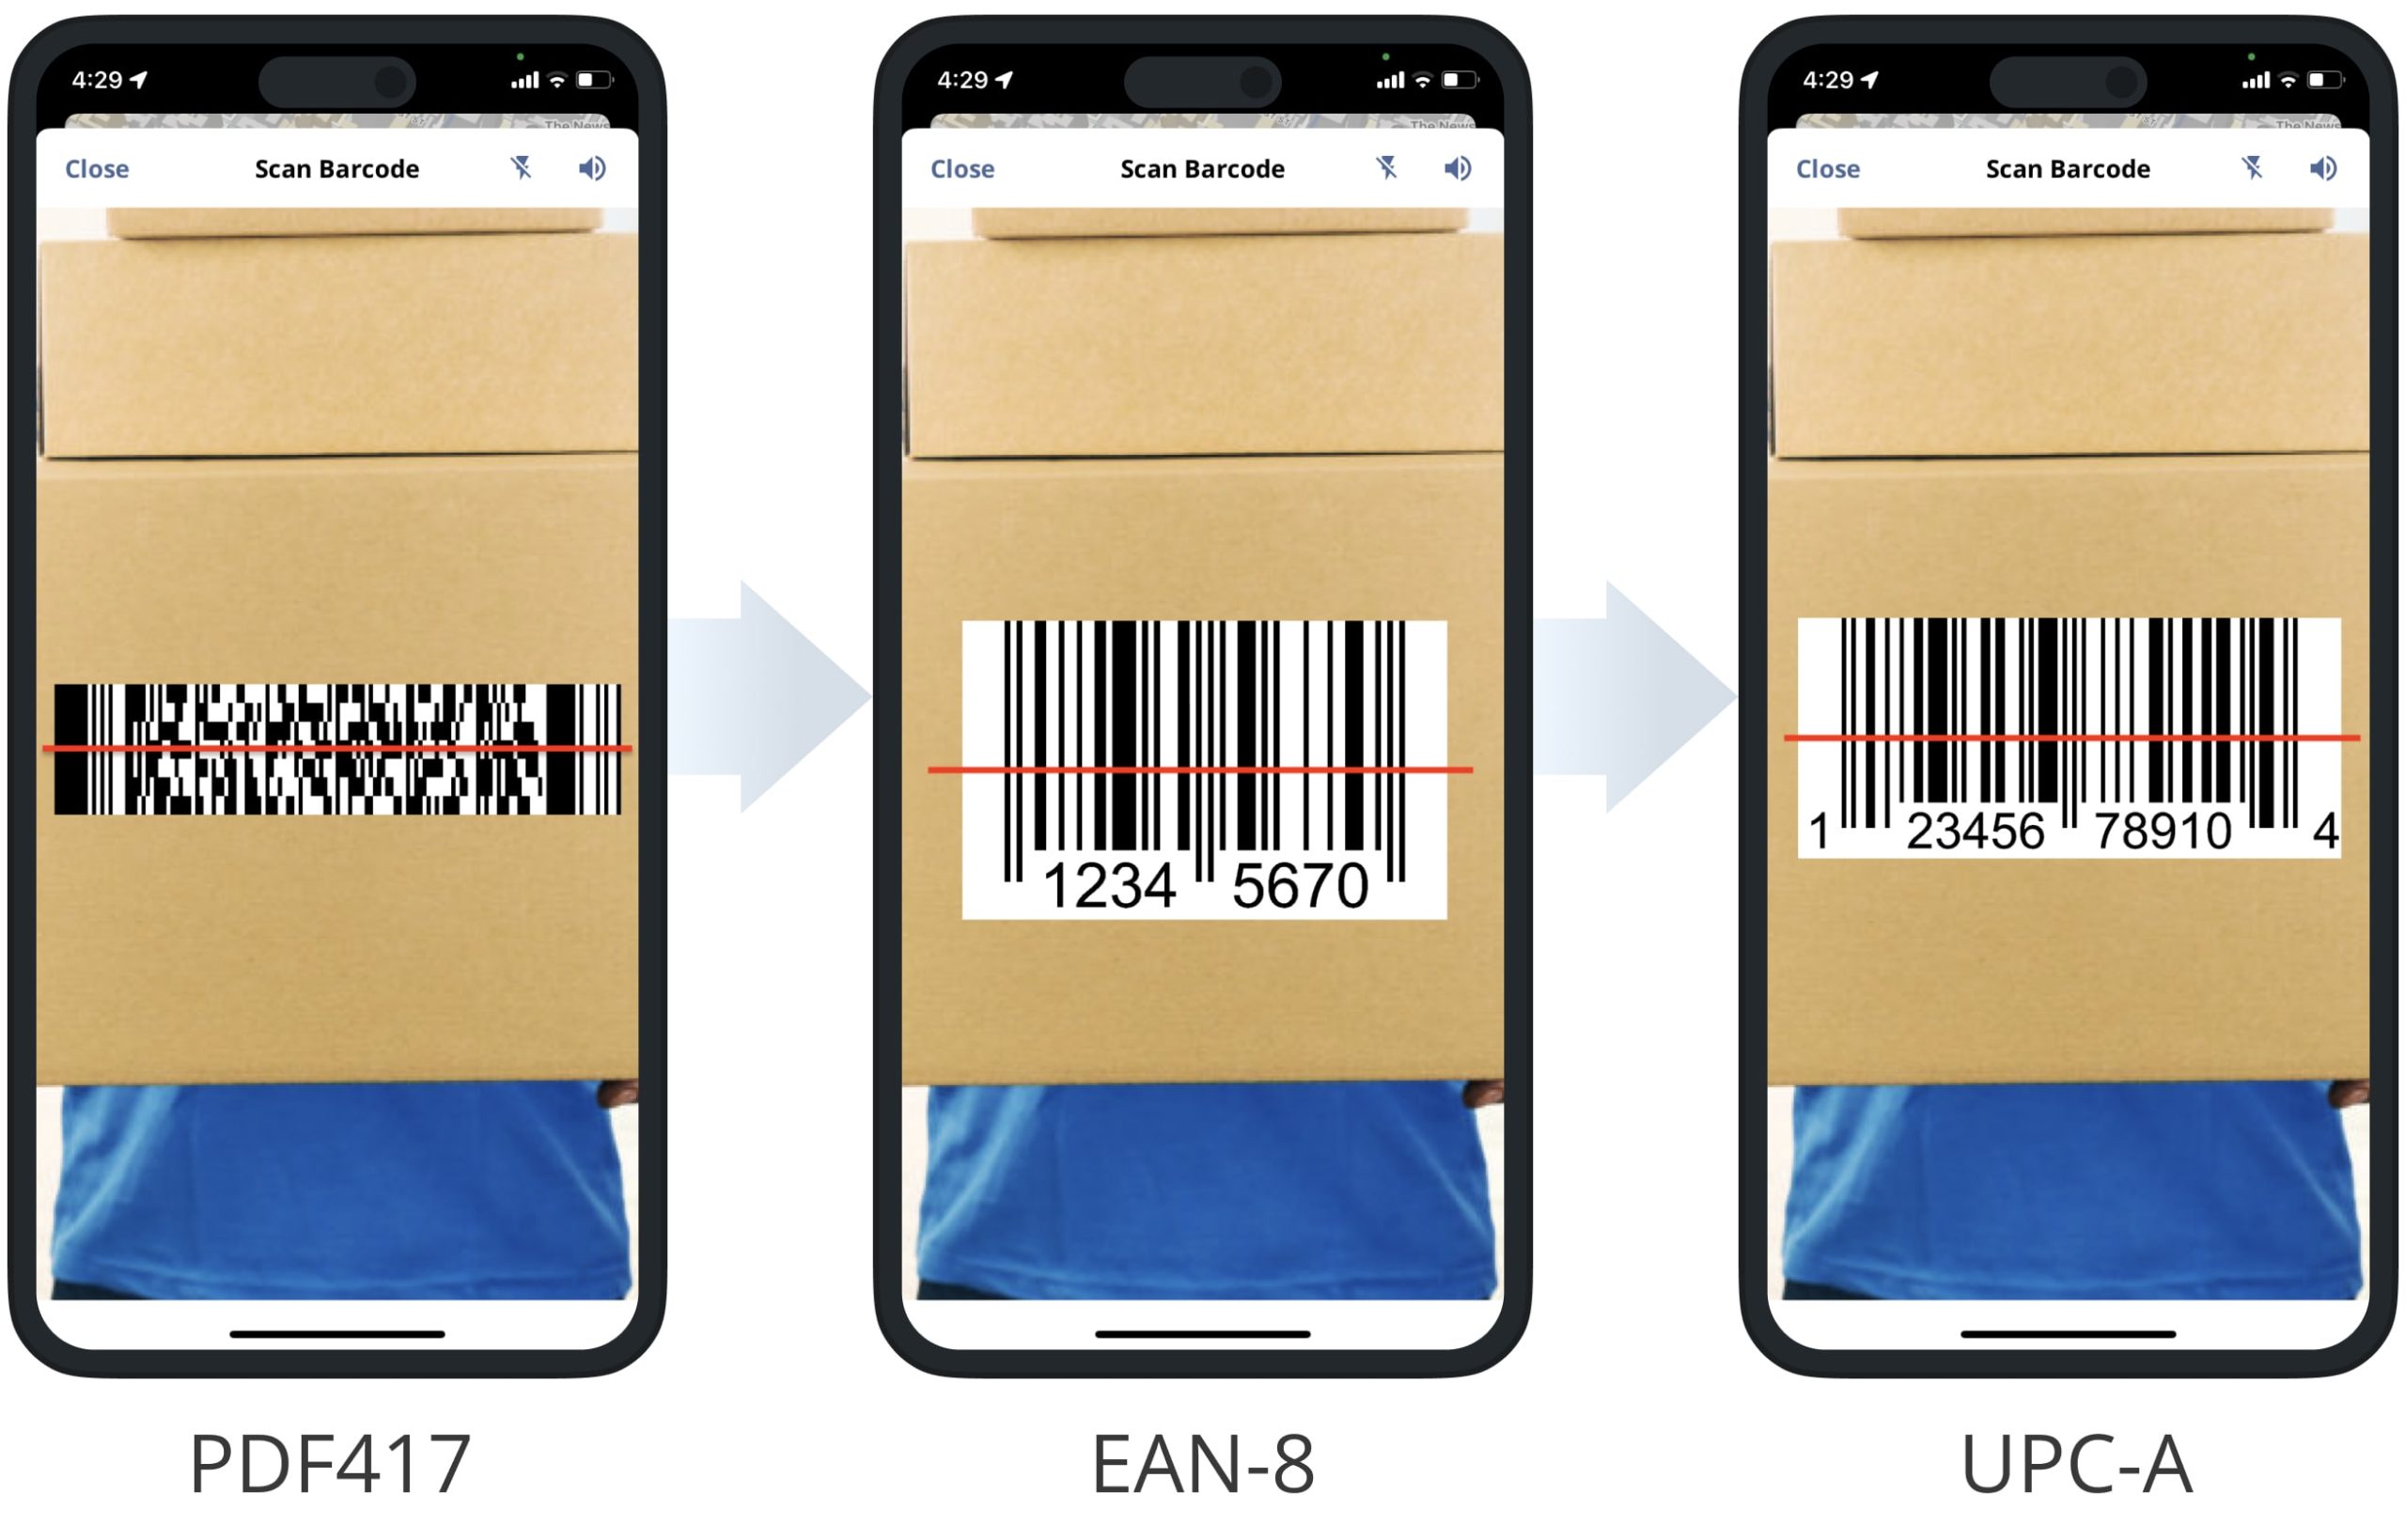 Scan PDF417, EAN-8, and UPC-A barcodes using Route4Me's iOS Mobile Route Planner in-app barcode scanner.